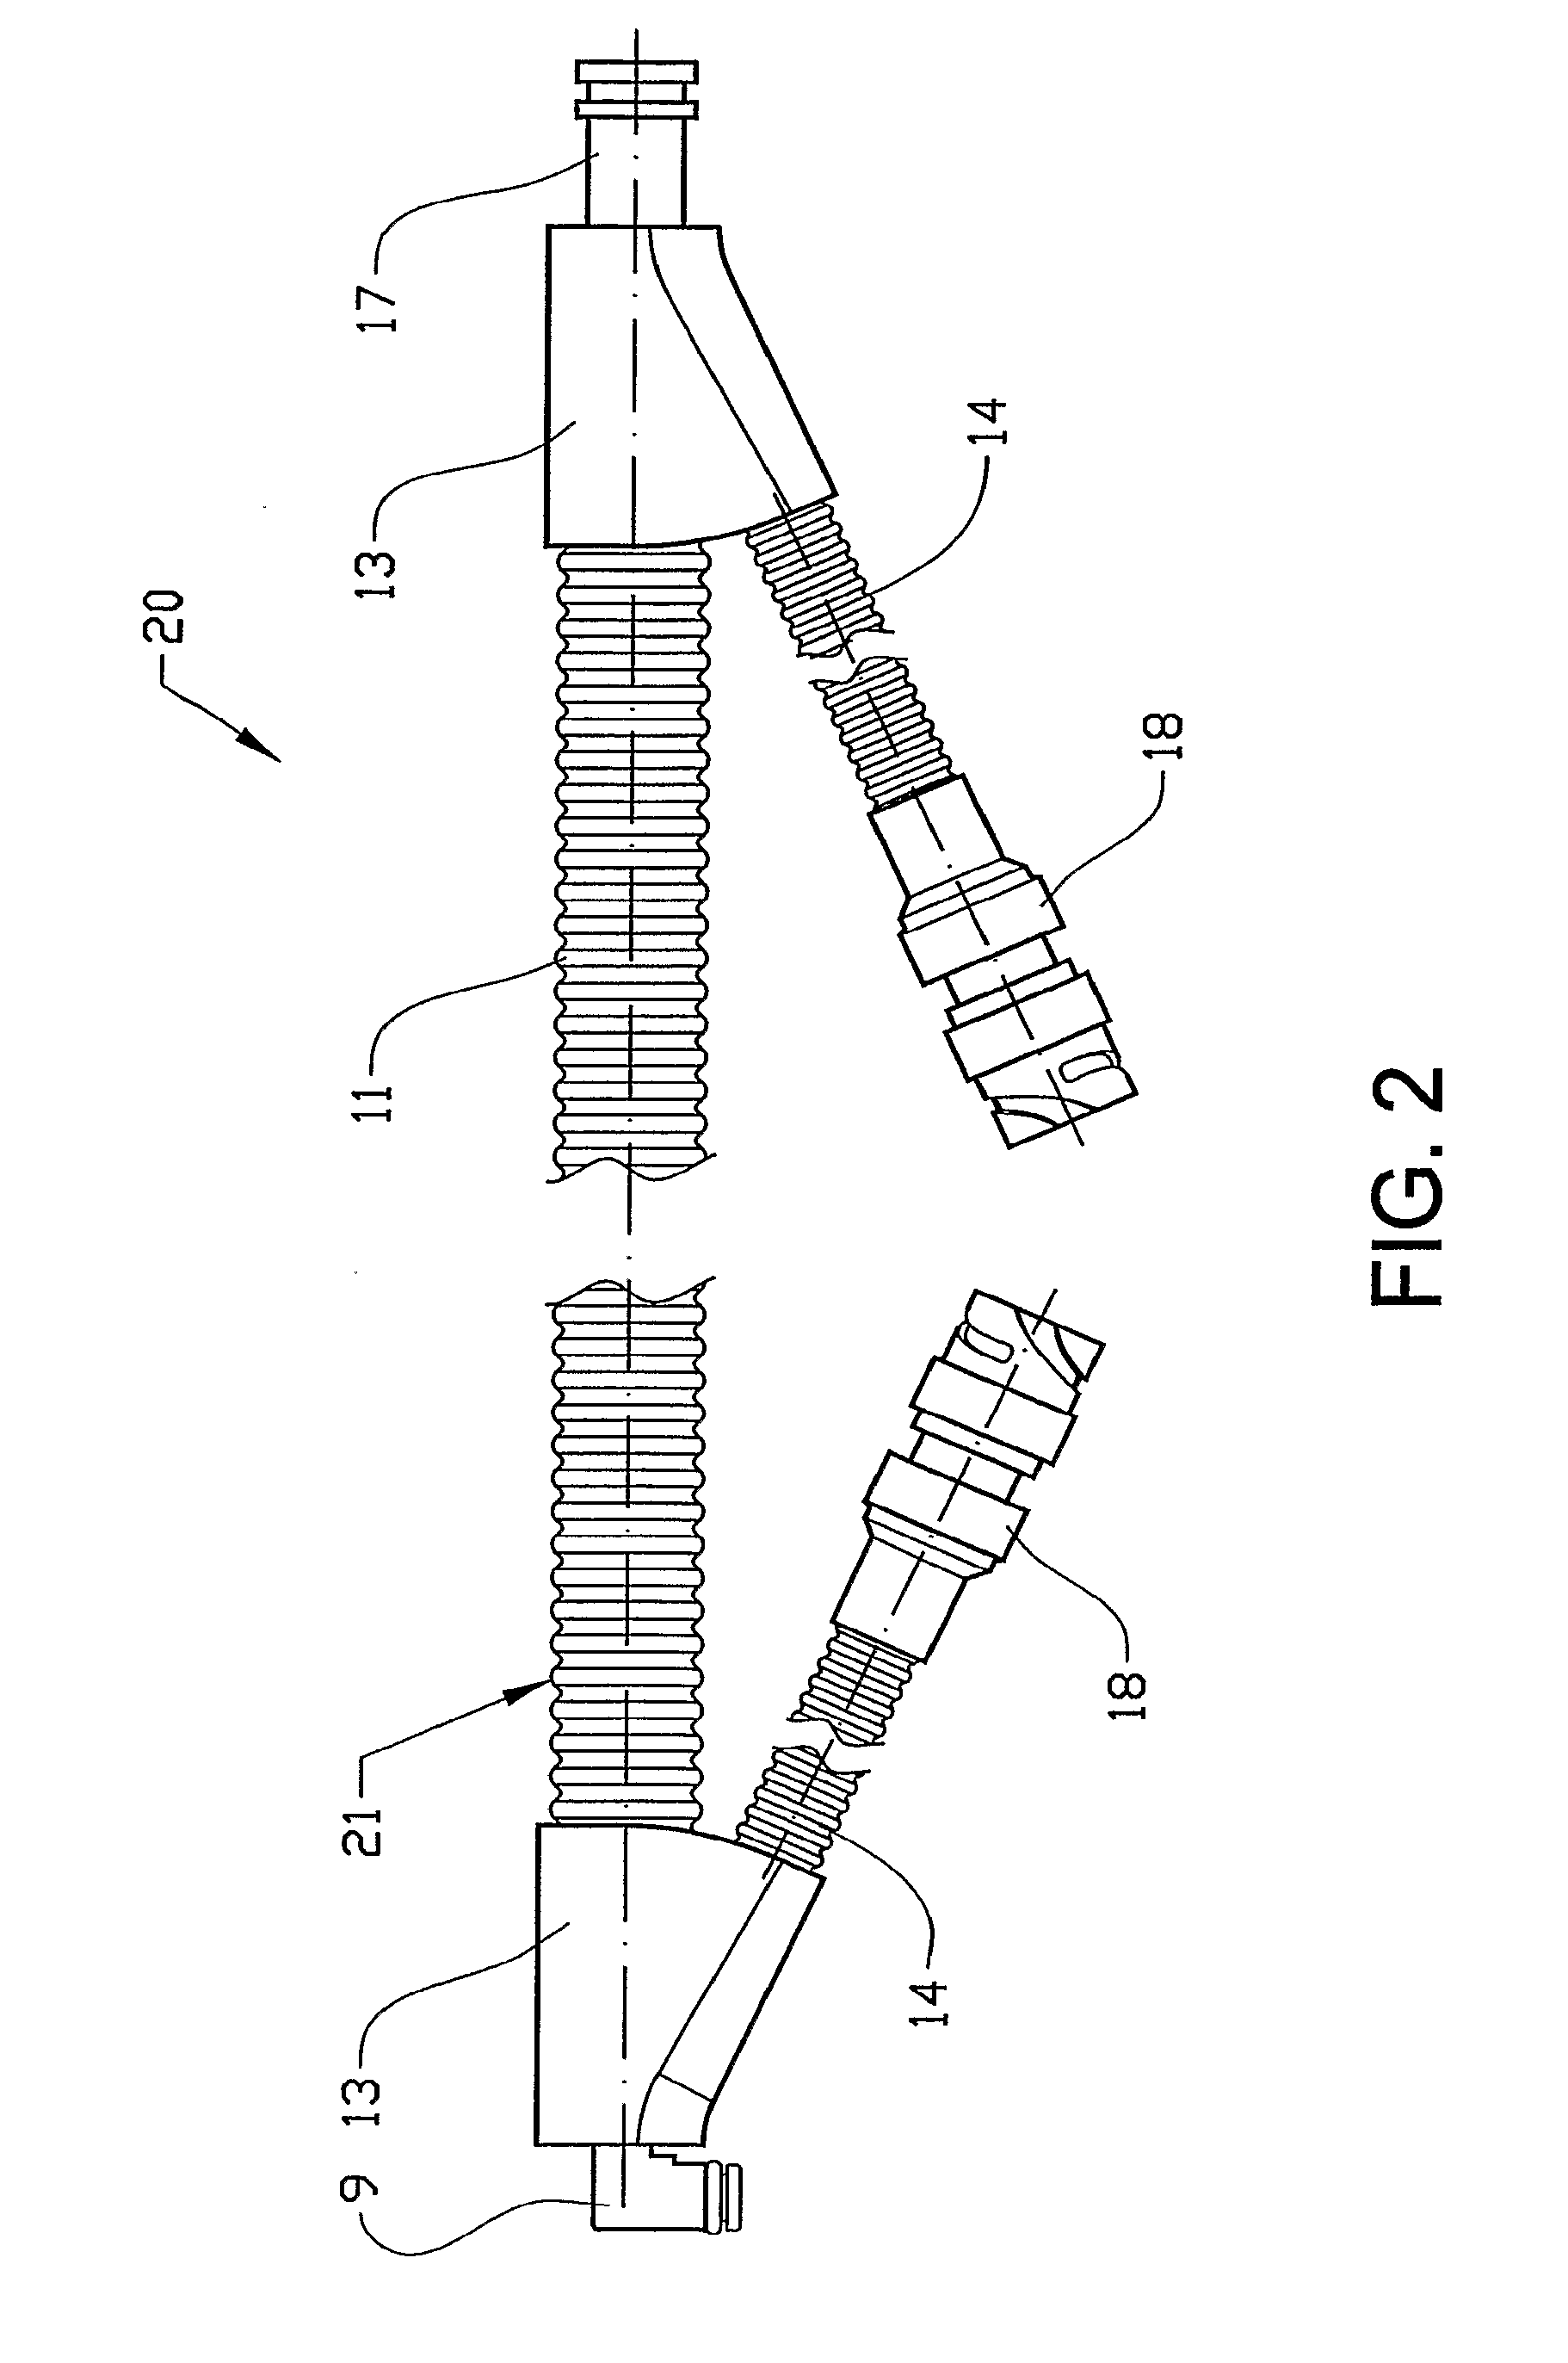 Electrically heatable cabling